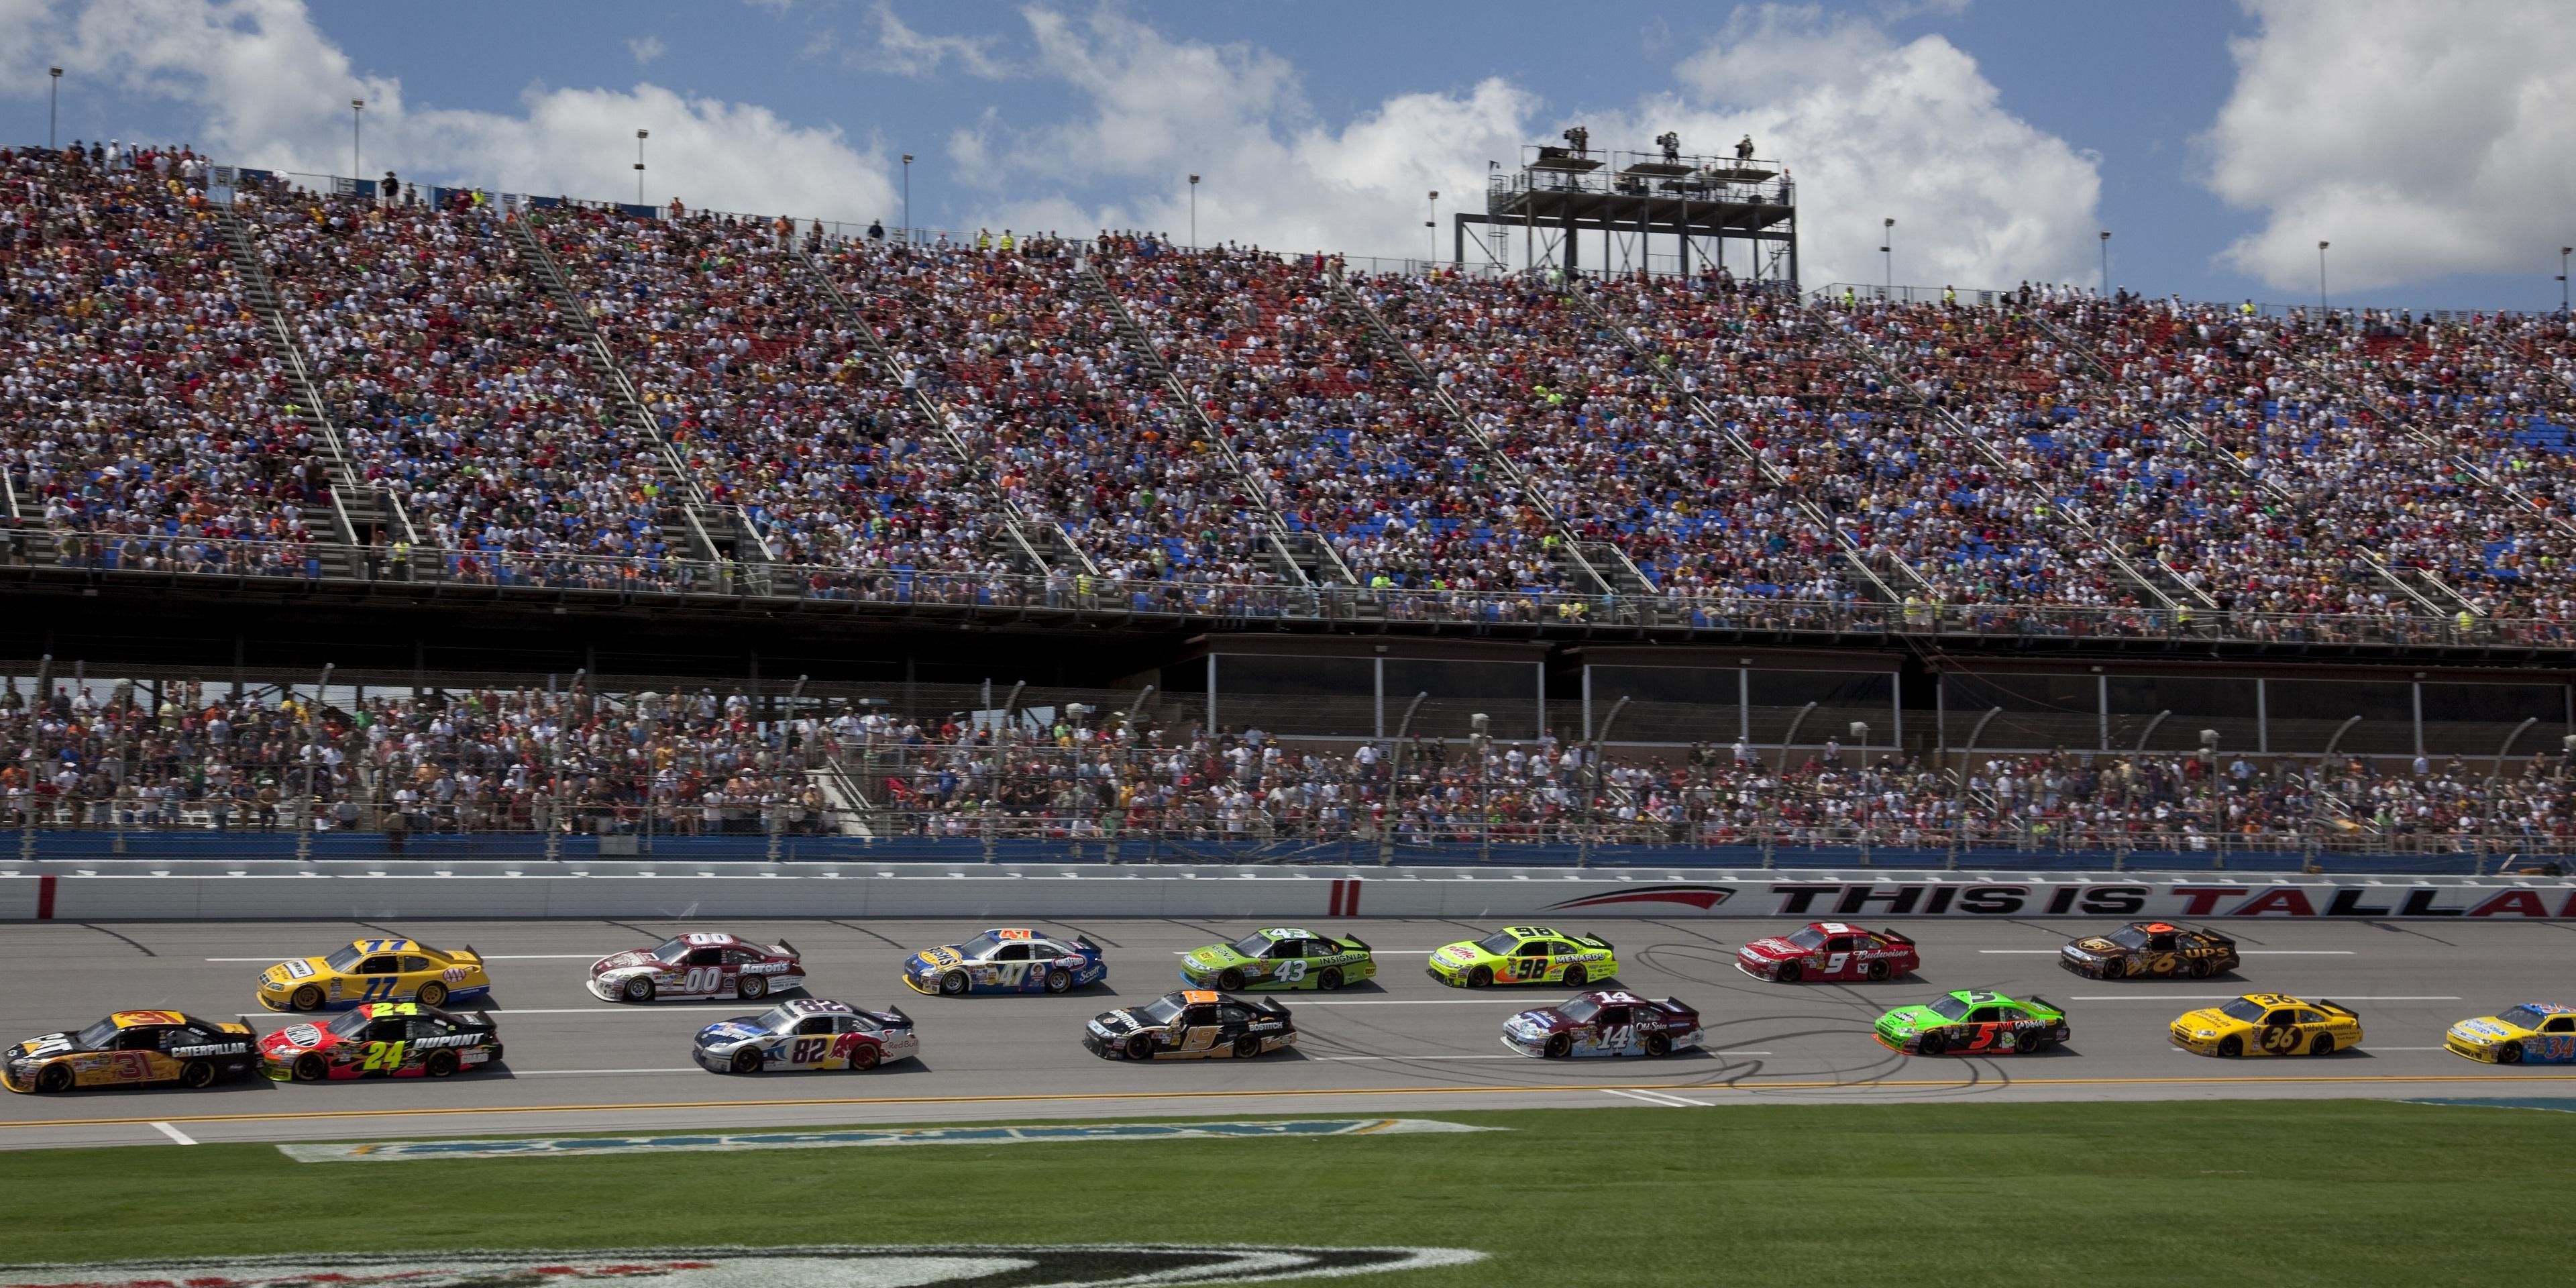 15 miles to this legendary NASCAR race track and the International Motorsports Hall of Fame. Whether your favorite part is the cars, the noise, the food, the beer, or the bands - staying at Holiday Inn Express Pell City will enhance your race experience.